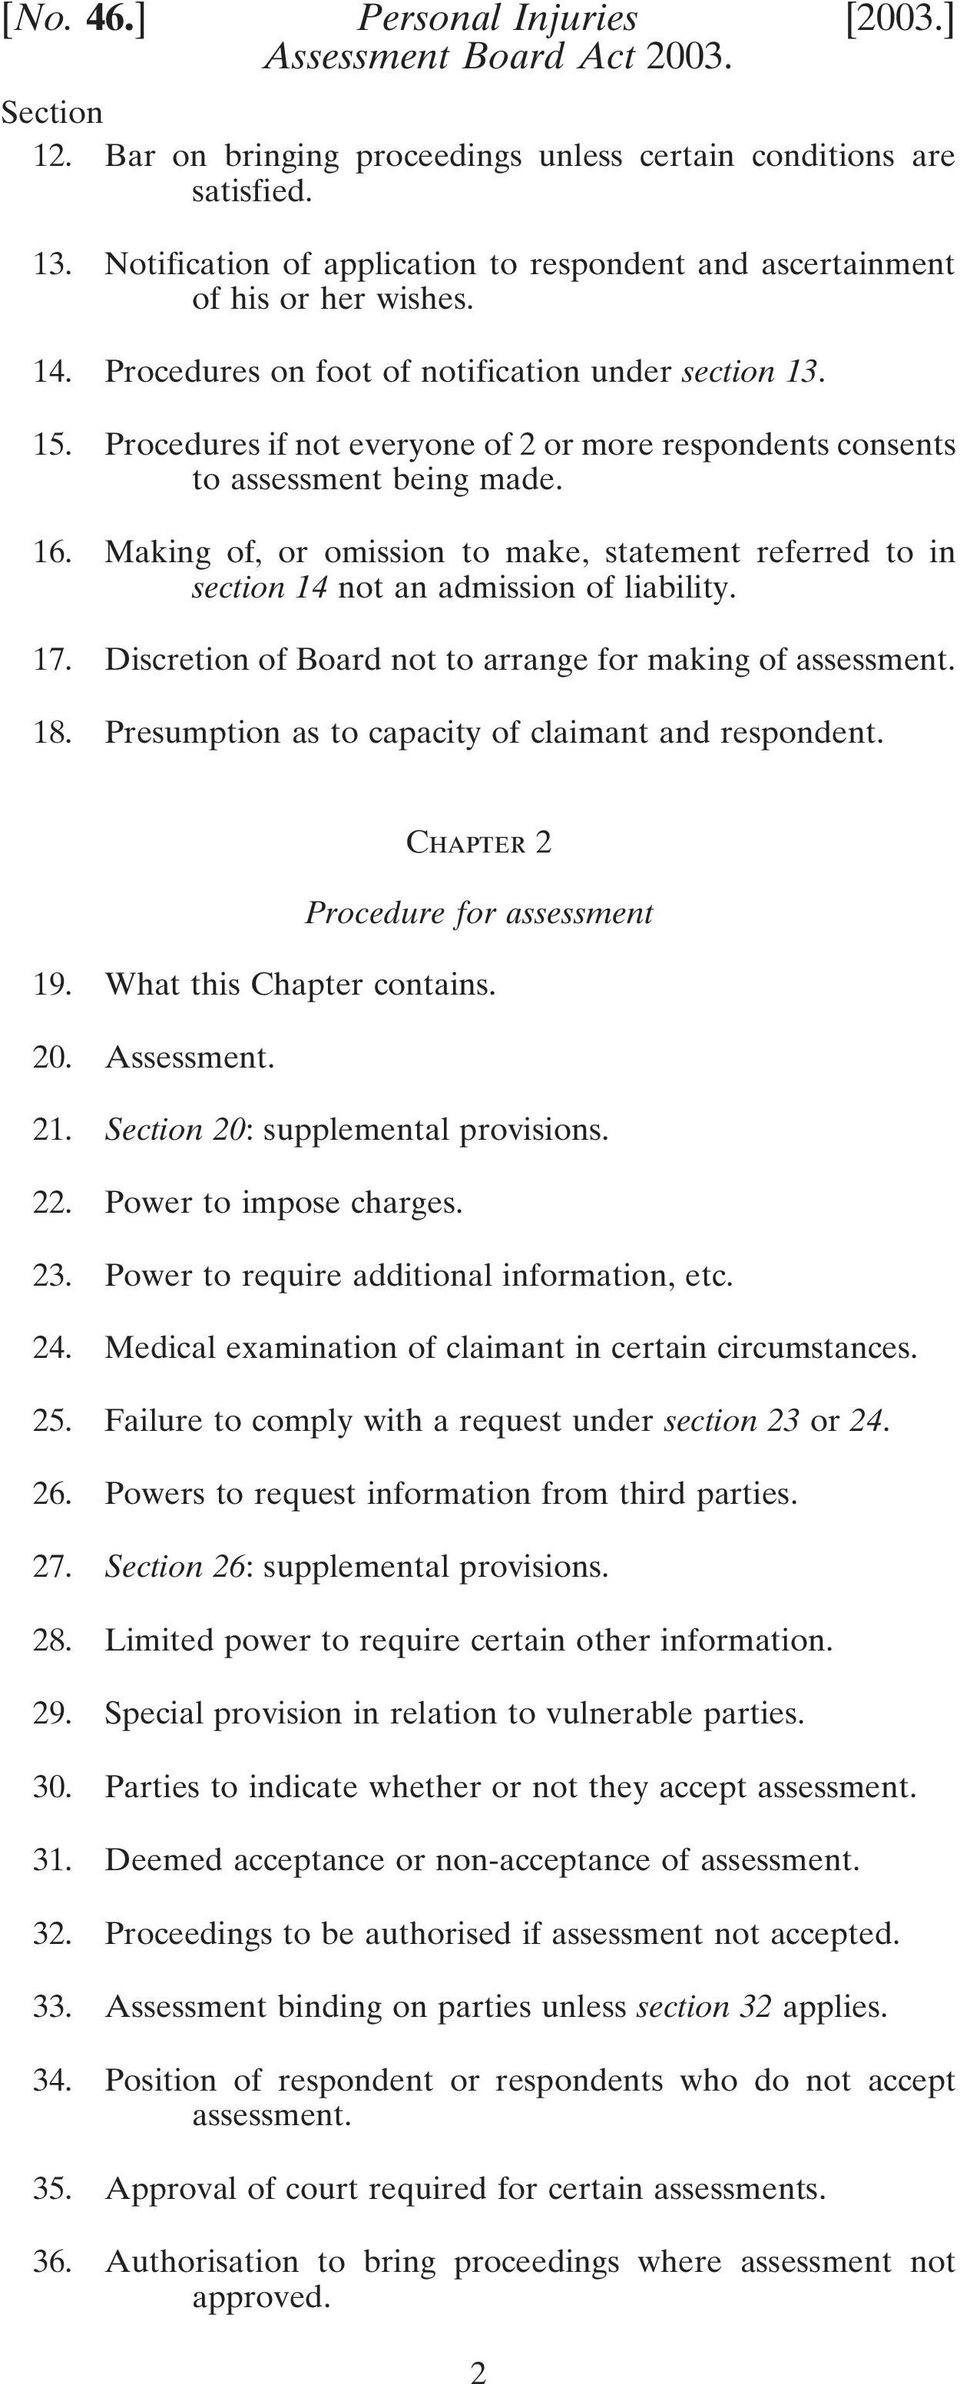 Procedures if not everyone of 2 or more respondents consents to assessment being made. 16. Making of, or omission to make, statement referred to in section 14 not an admission of liability. 17.